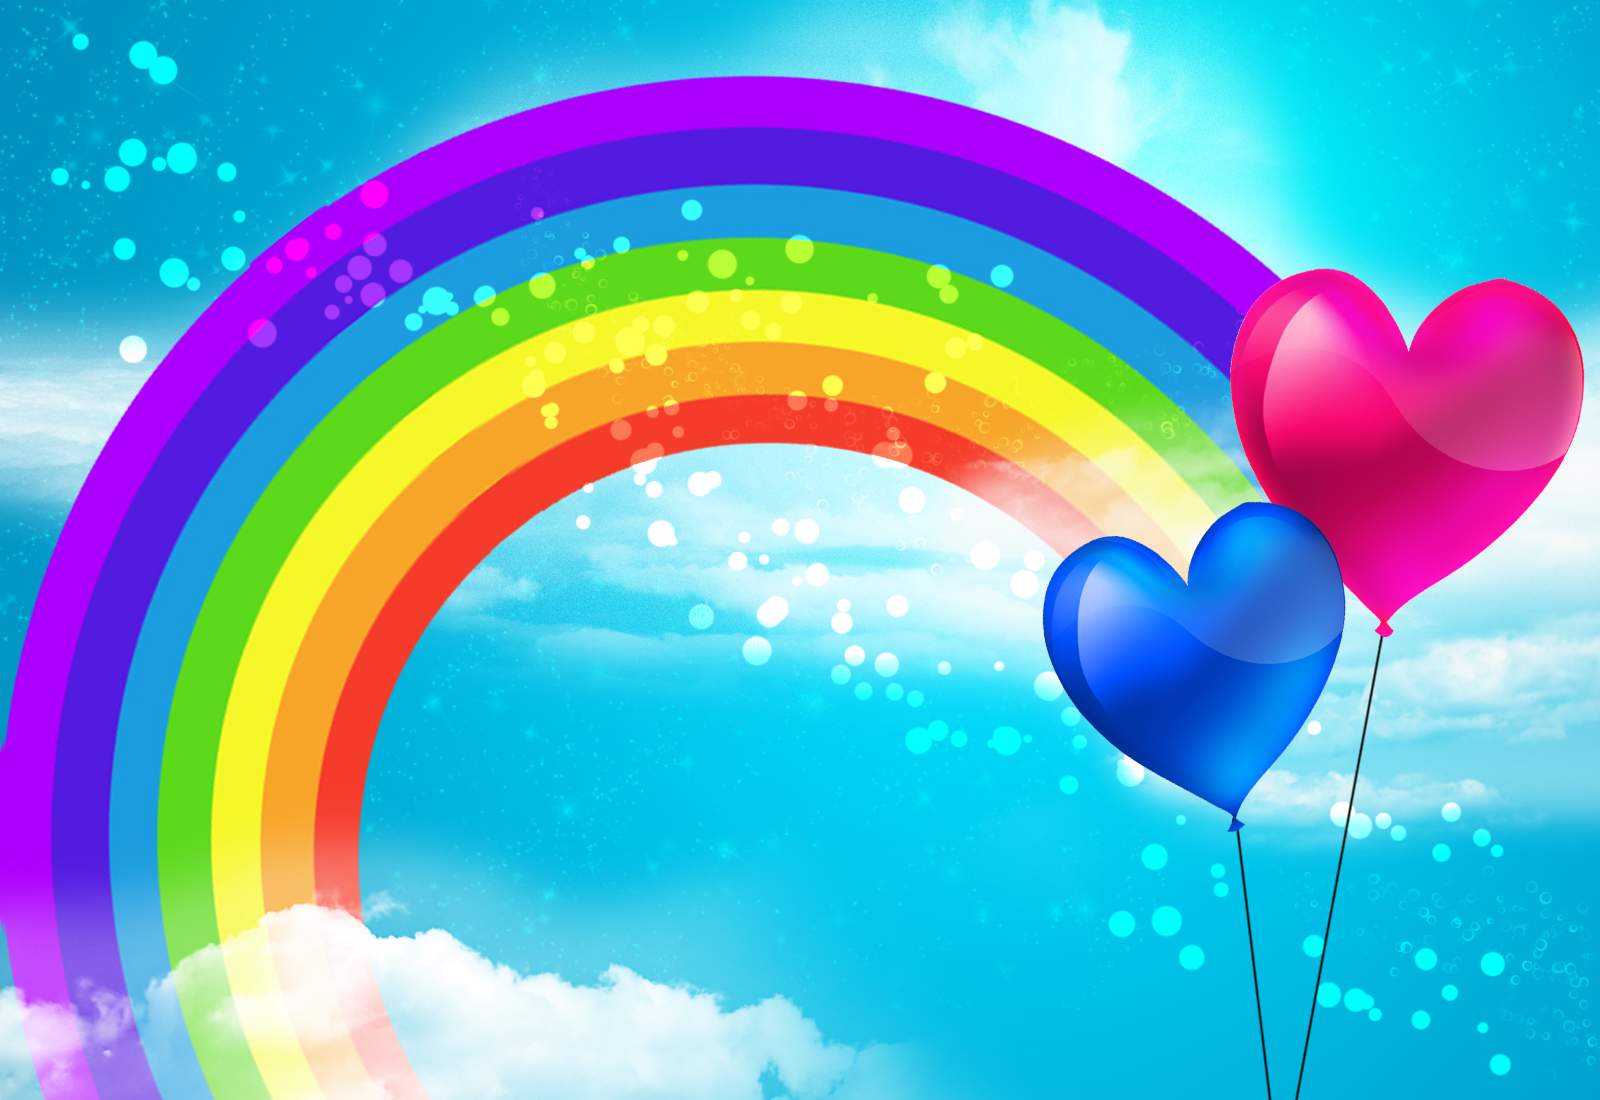 Rainbows Images   500 Collection HD Wallpaper